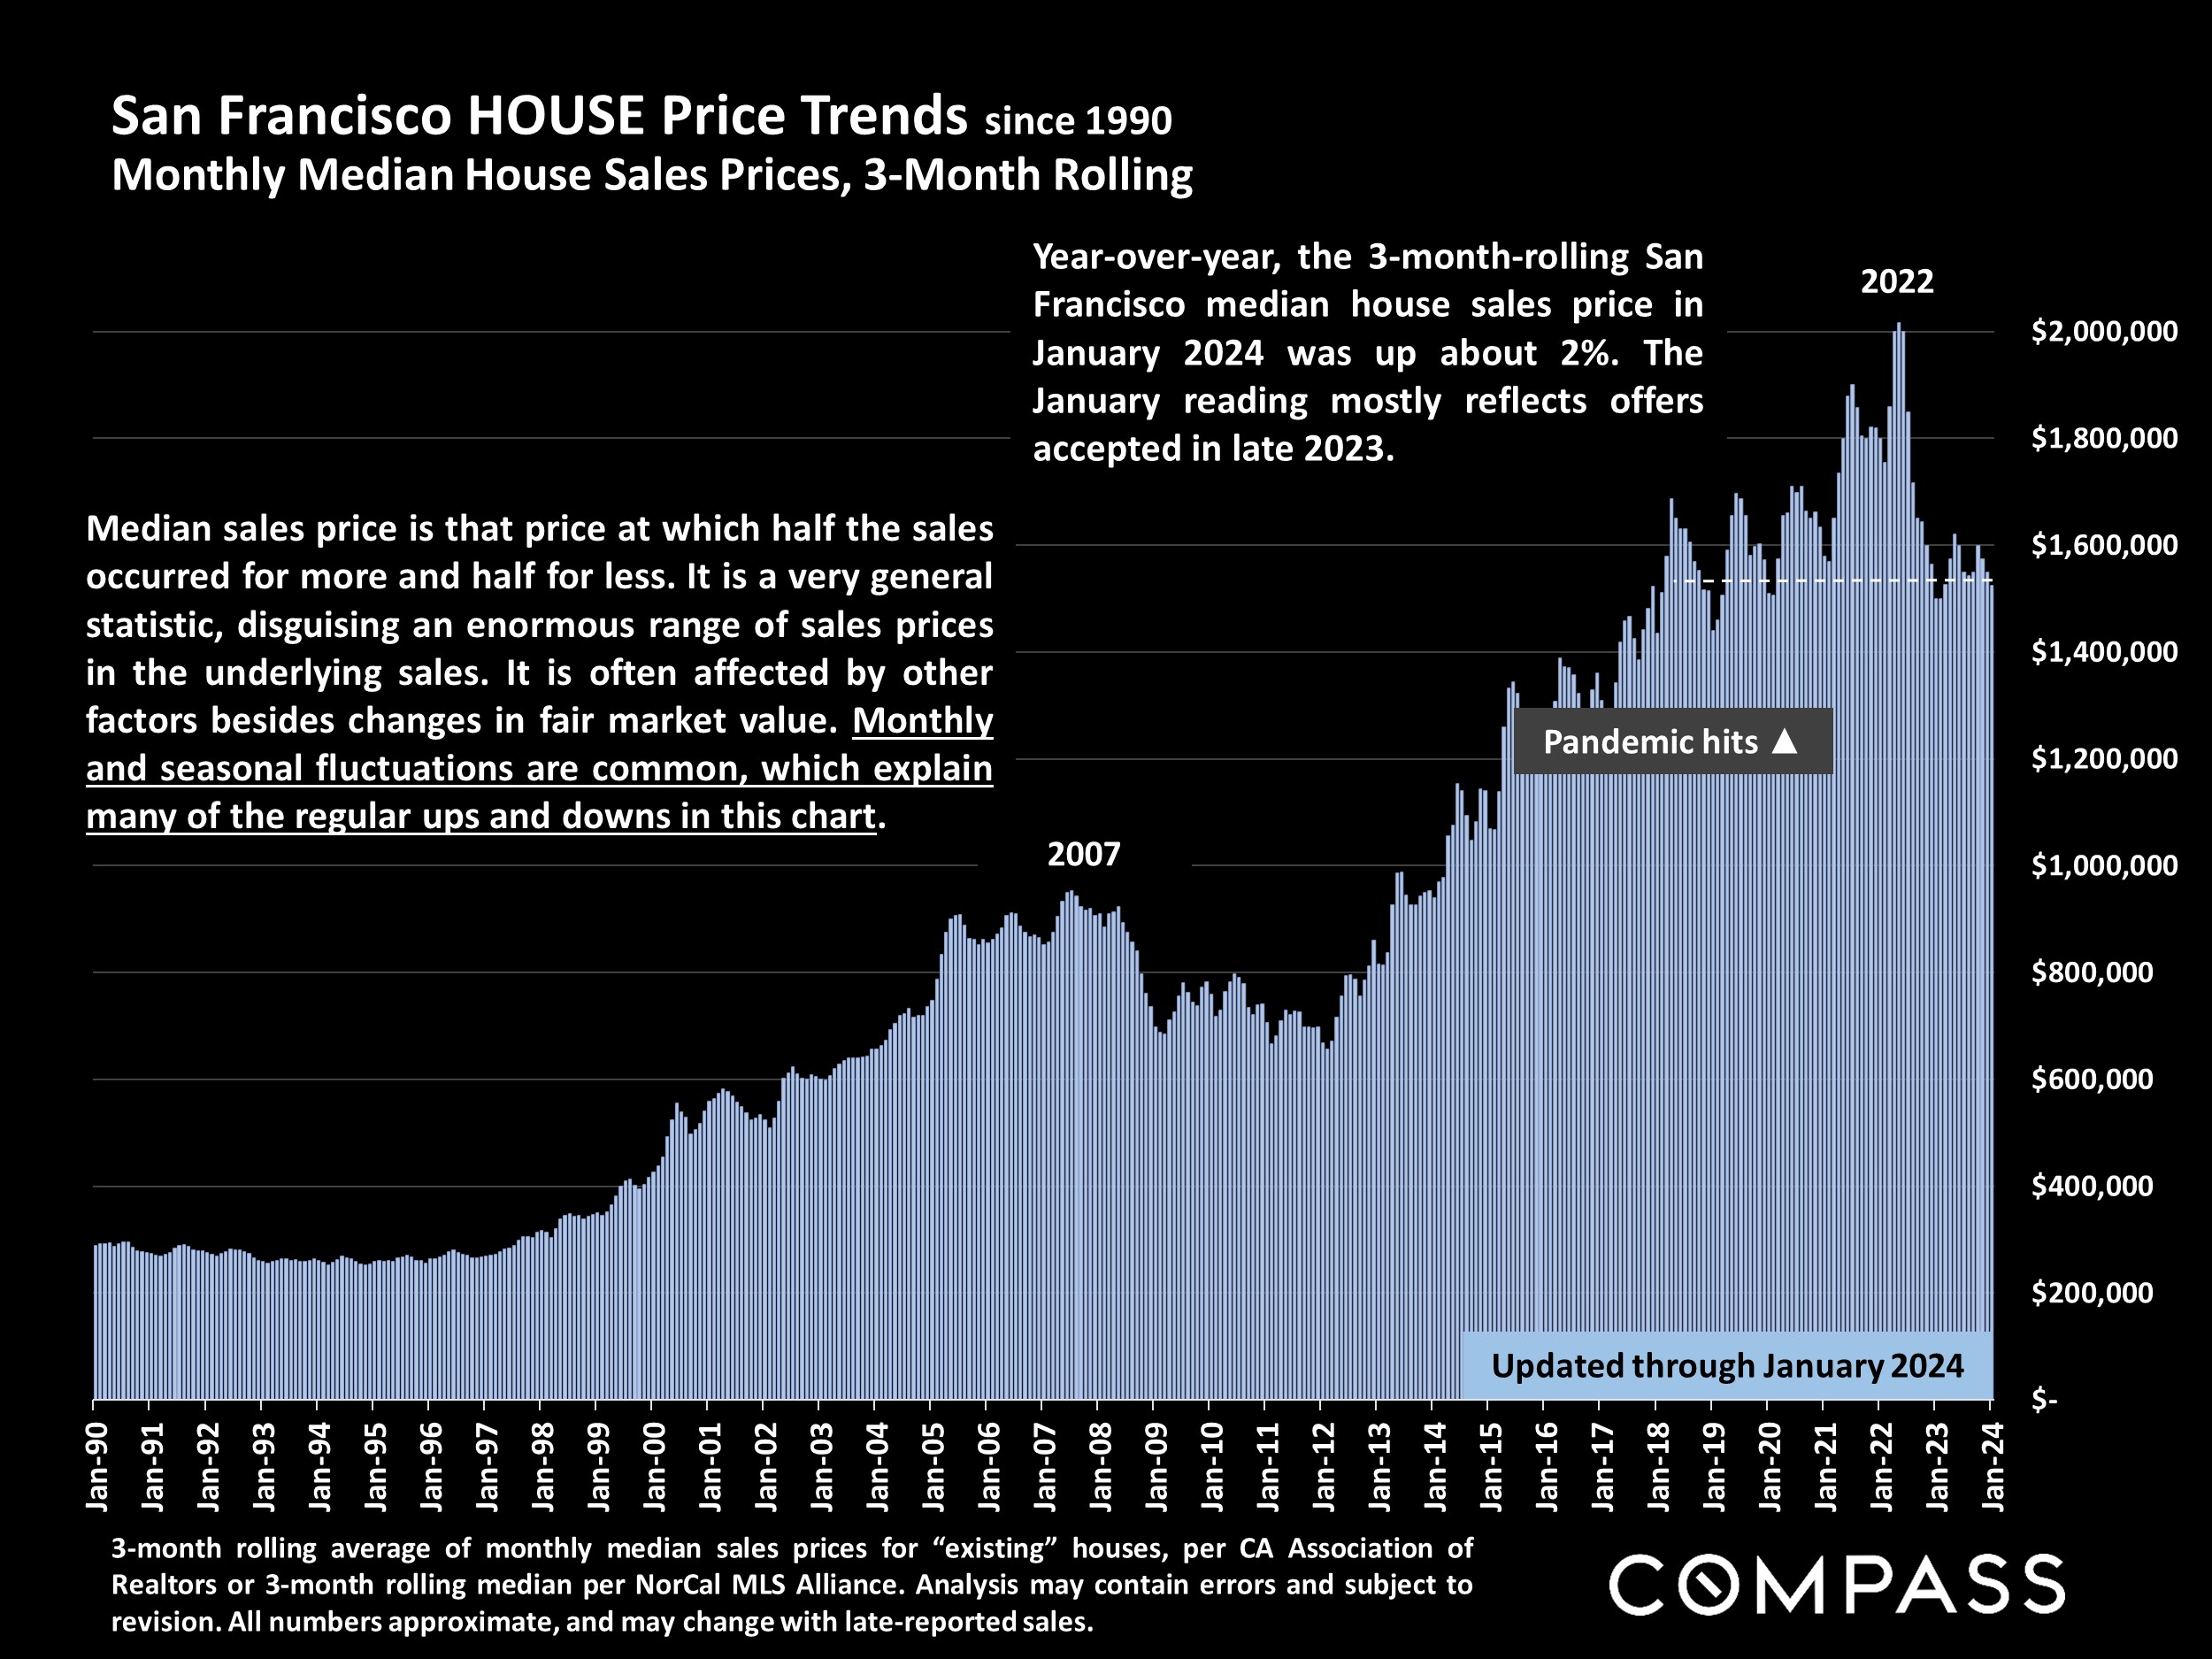 San Francisco HOUSE Price Trends since 1990 Monthly Median House Sales Prices, 3-Month Rolling